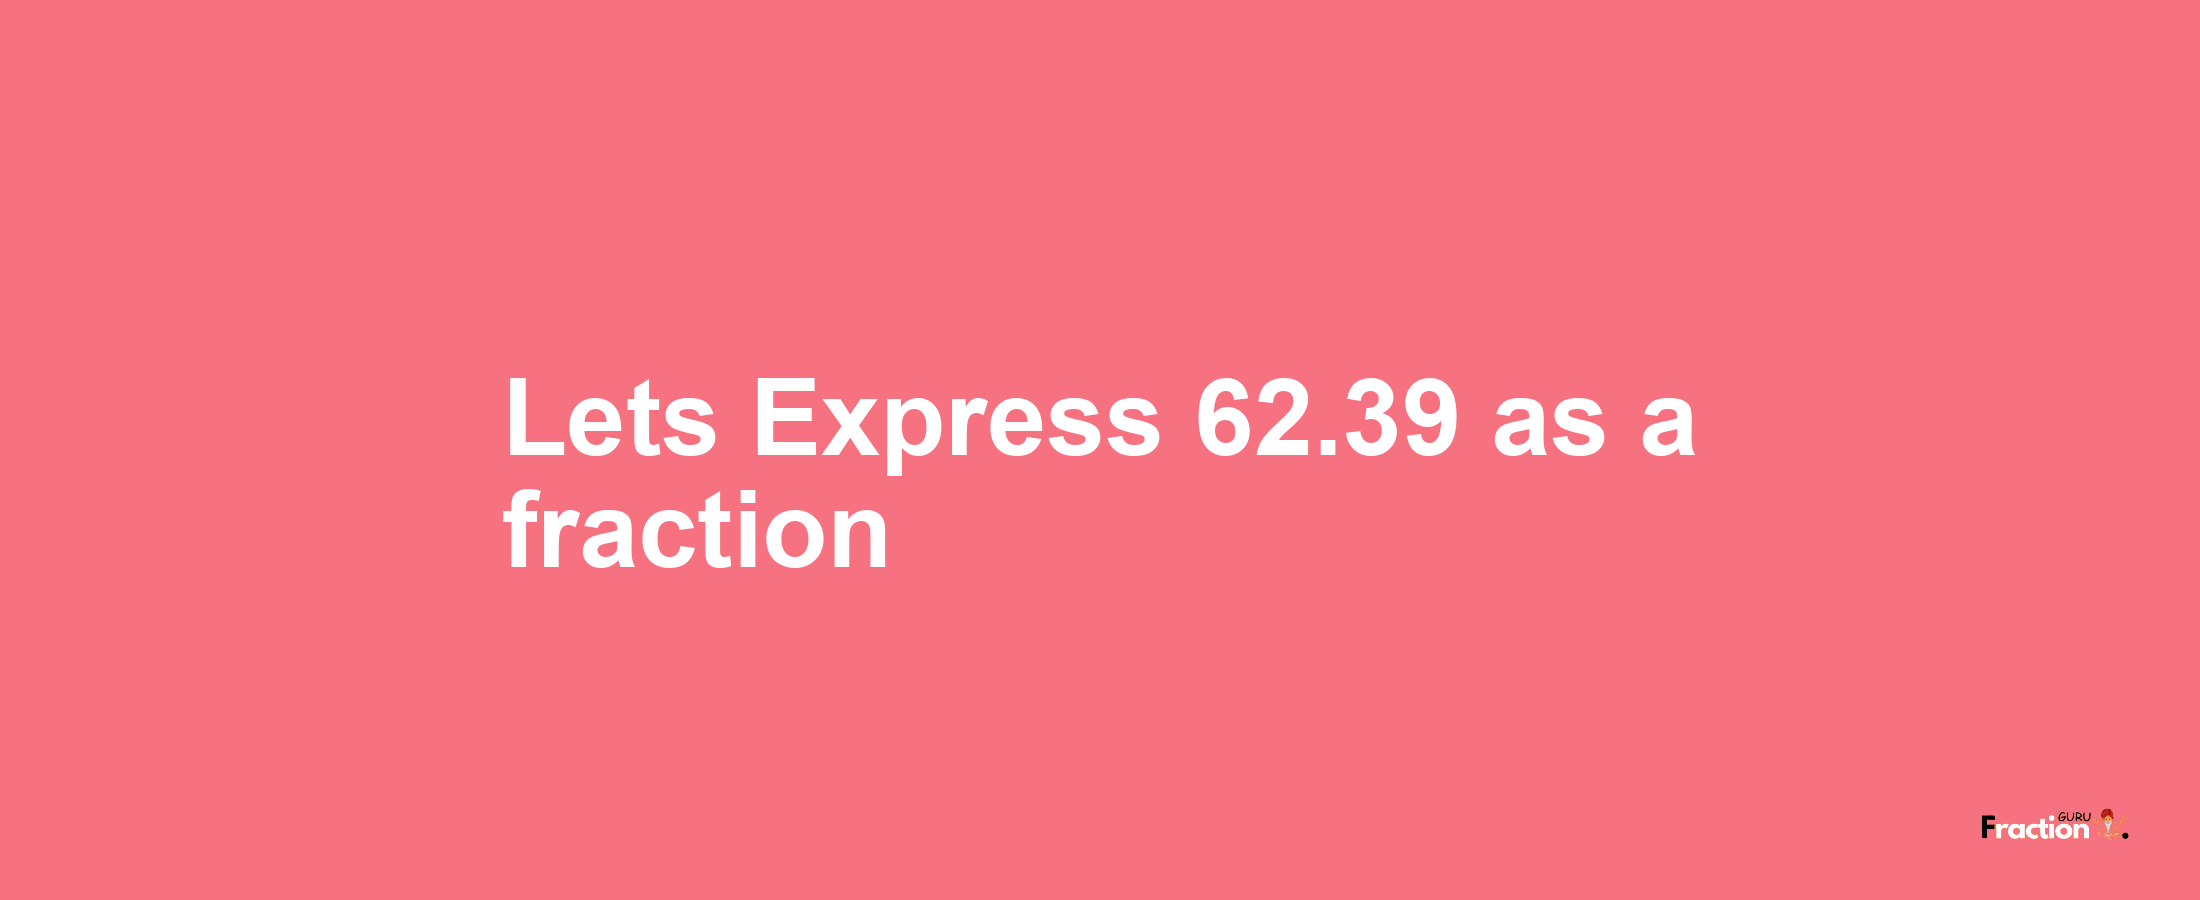 Lets Express 62.39 as afraction